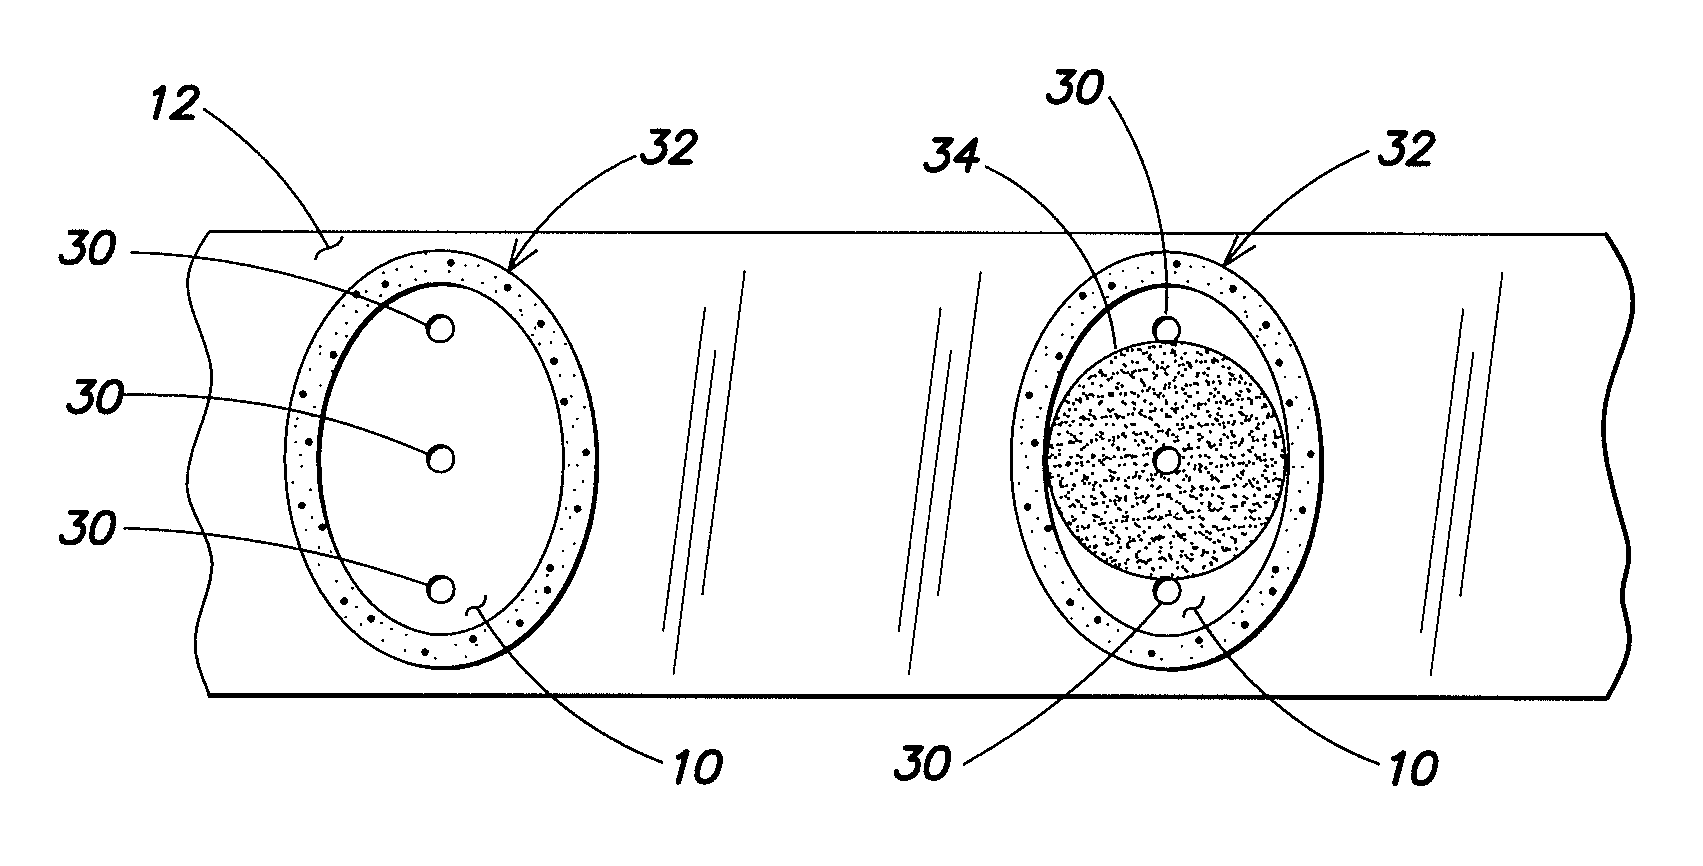 Method and apparatus for analyzing individual cells or particulates using fluorescent quenching and/or bleaching